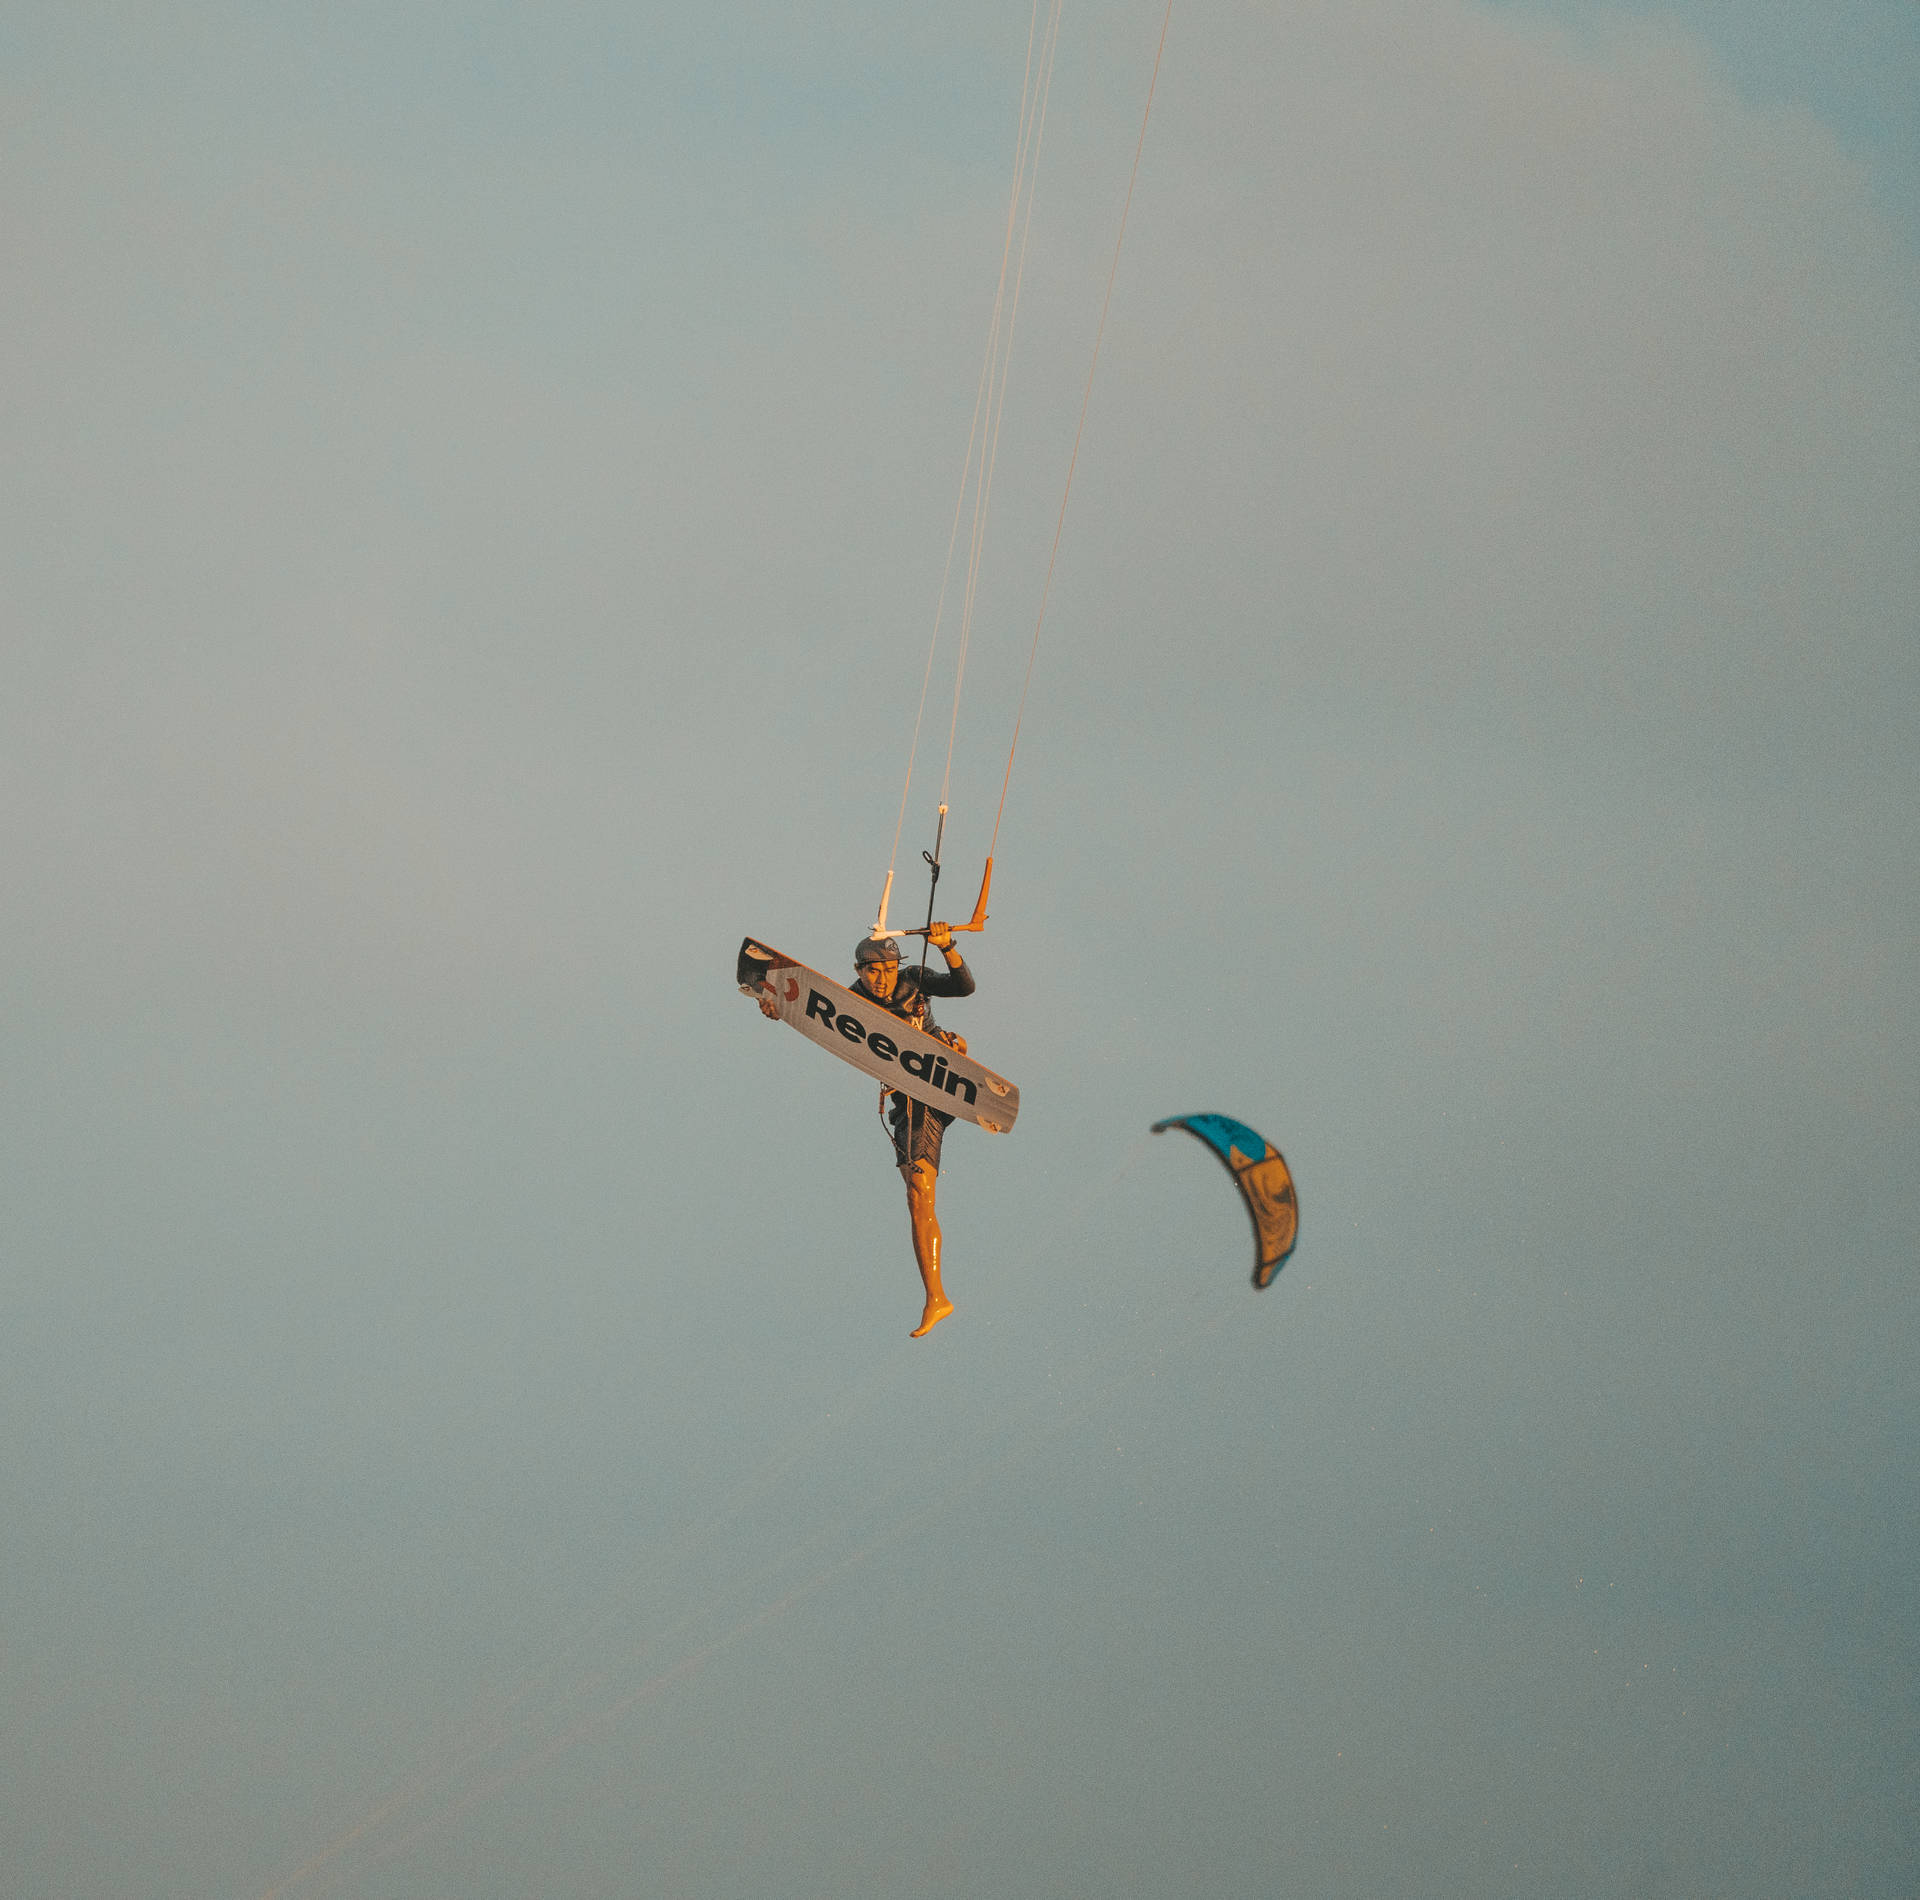 Windsurfing In The Air Background